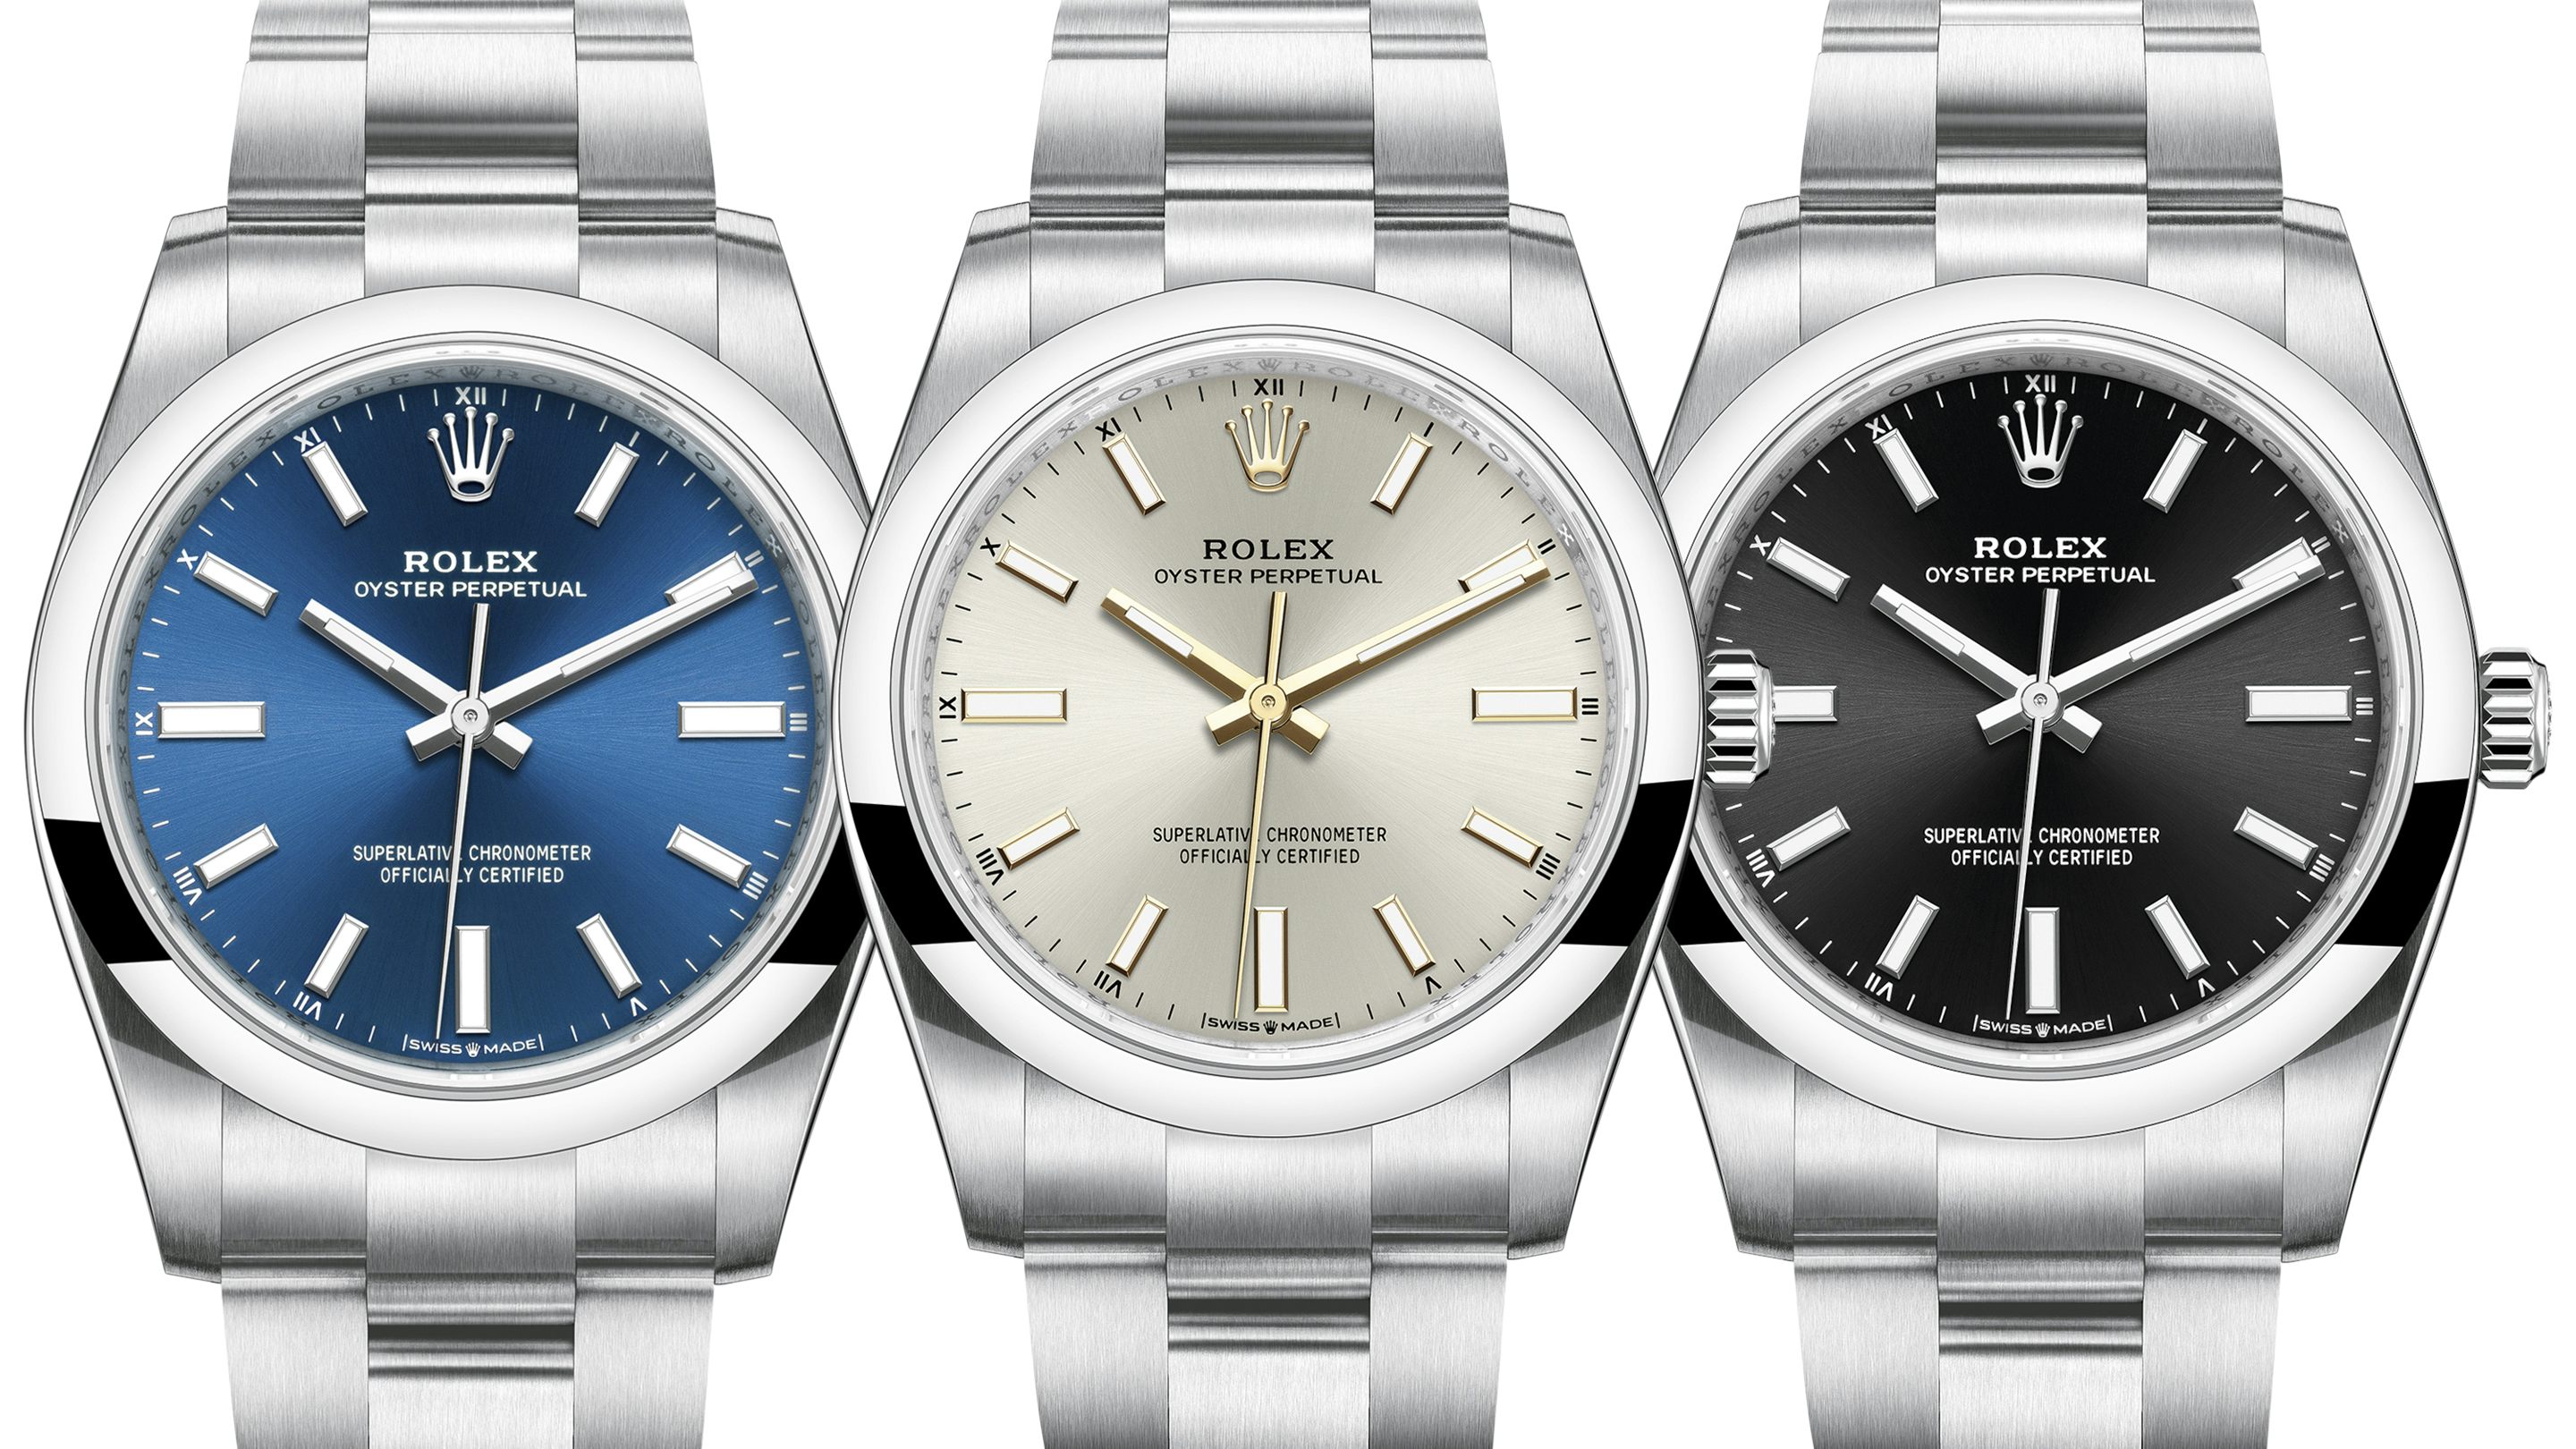 Introducing: The New Rolex Release You Probably Missed - HODINKEE